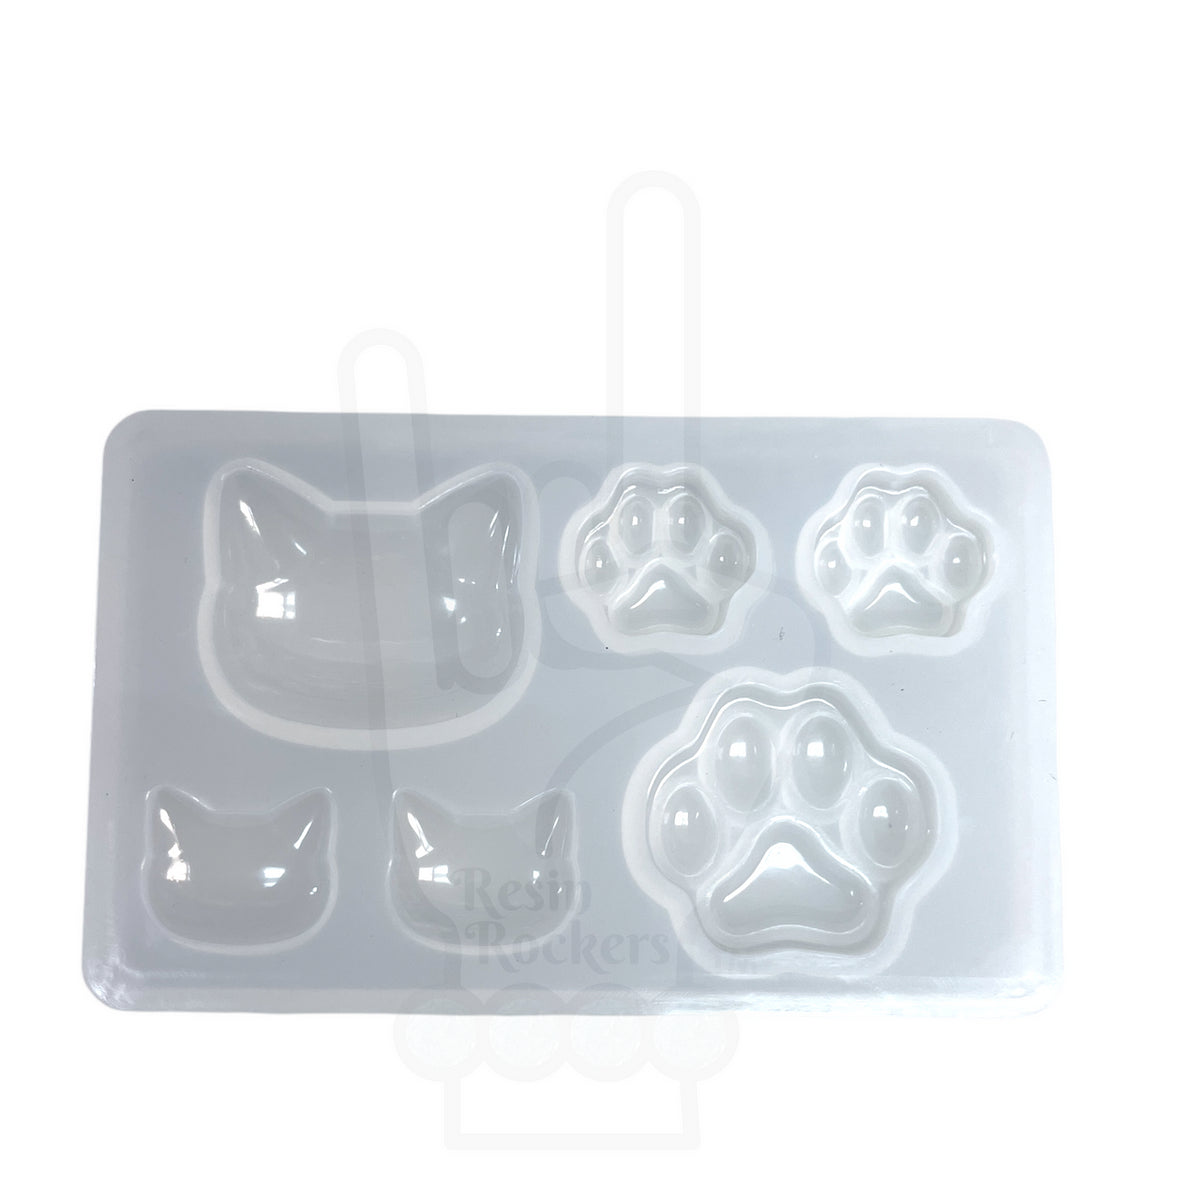 UV Safe Cat Heads and Paw Print Charm Duo Silicone Mold for UV or Epoxy Resin Art Single